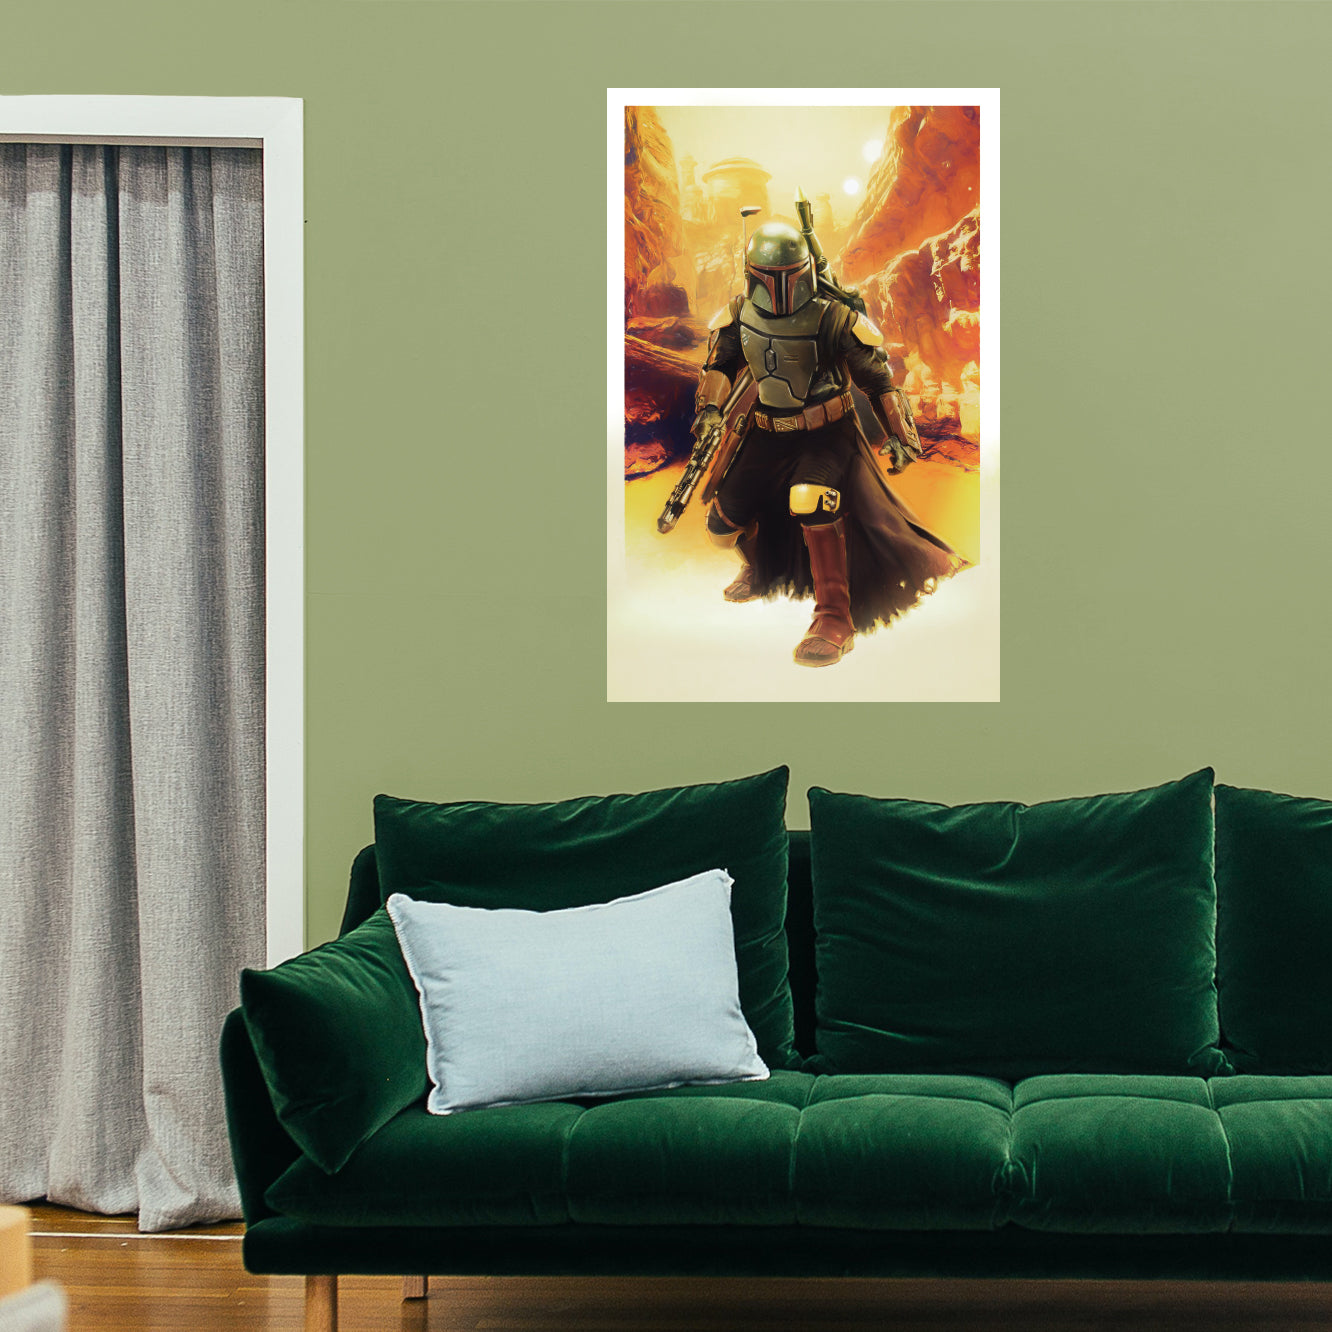 Book of Boba Fett: Boba Fett Mos Eisley Painted Poster - Officially Licensed Star Wars Removable Adhesive Decal